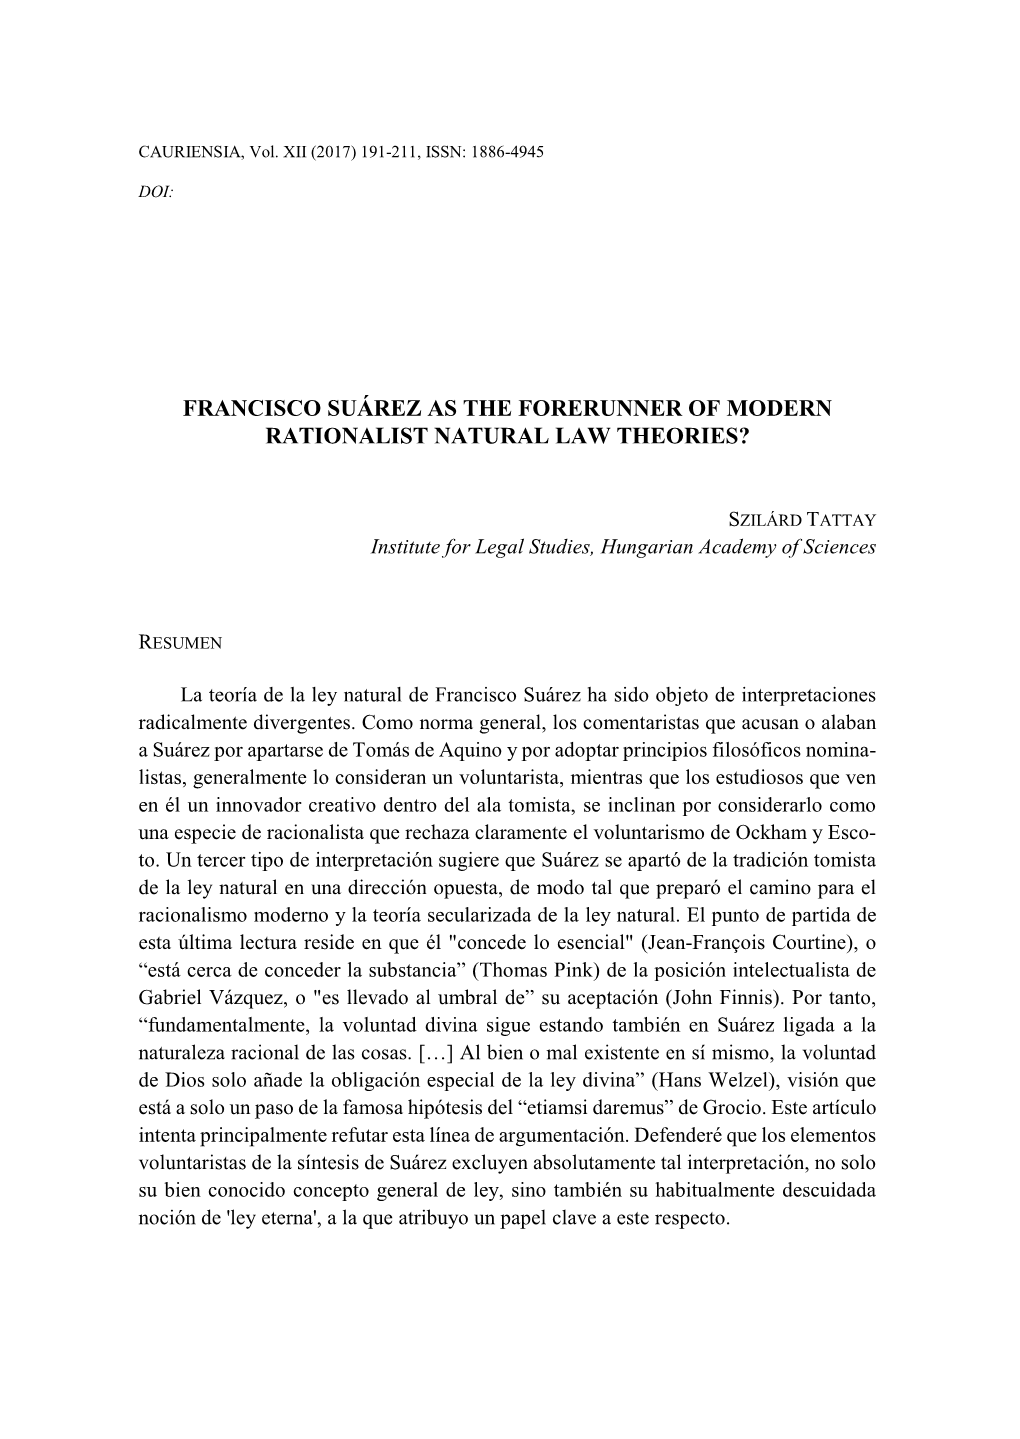 Francisco Suárez As the Forerunner of Modern Rationalist Natural Law Theories?